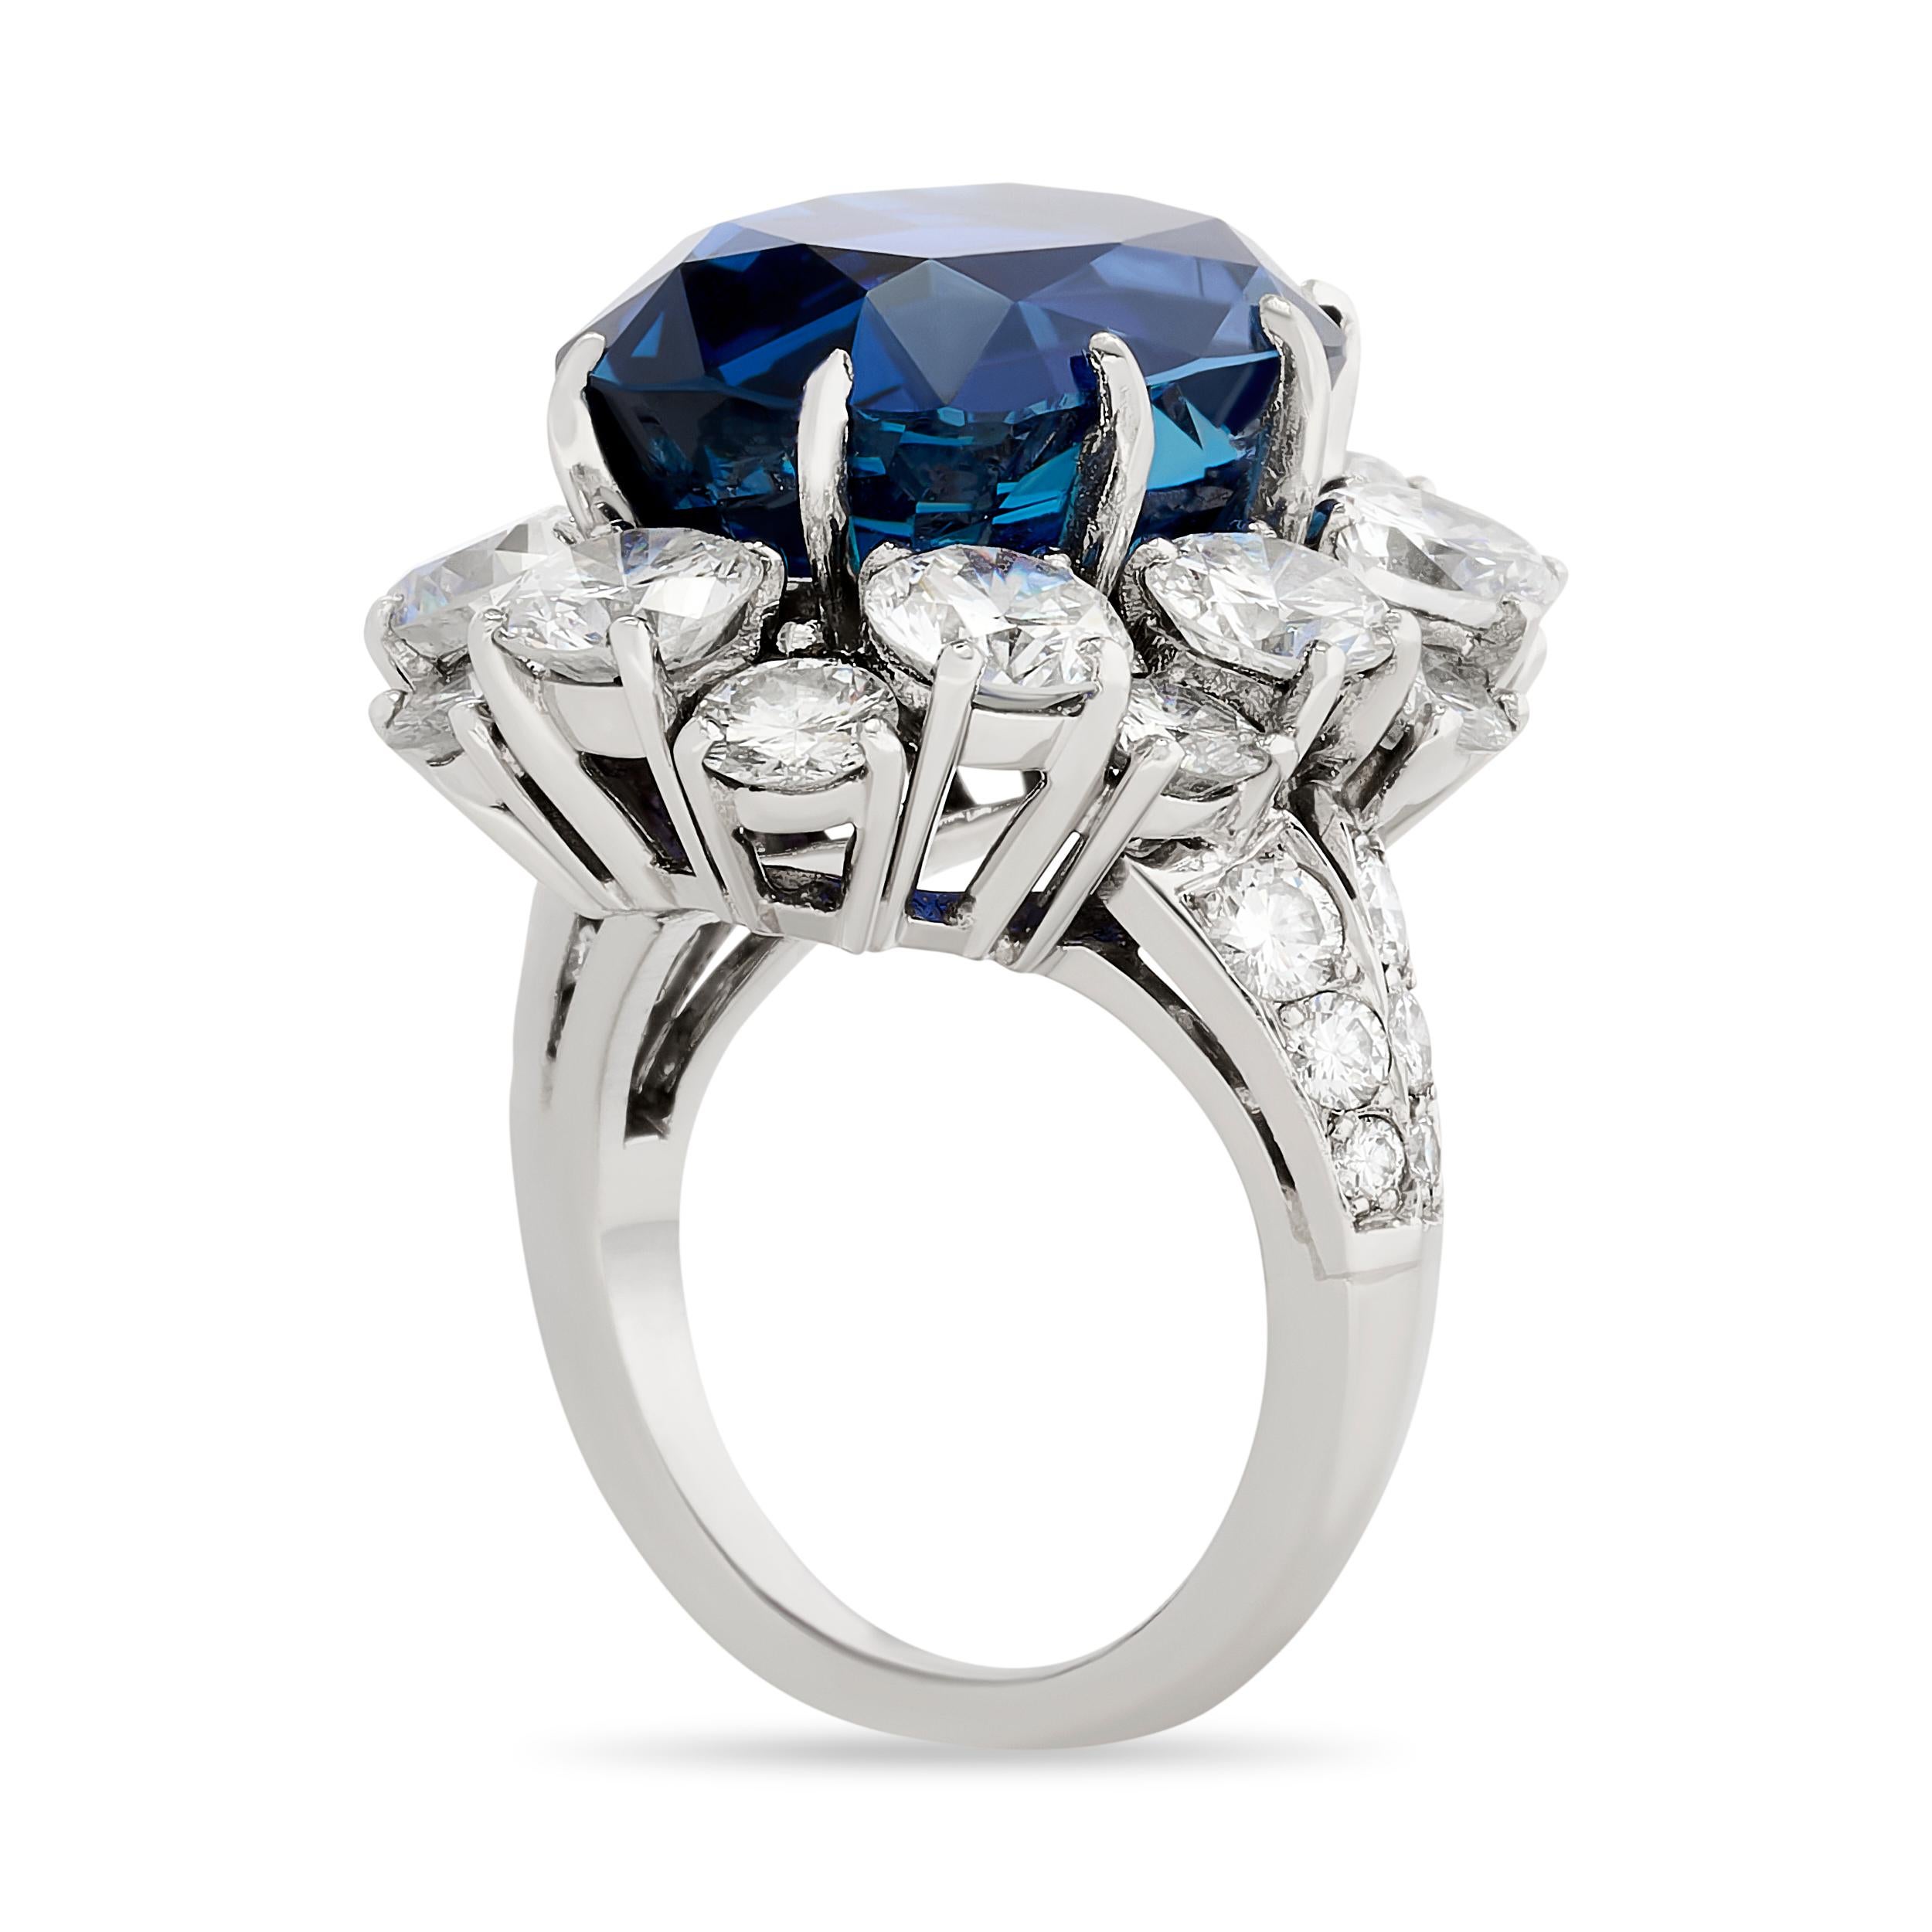 Captivating elegance meets timeless beauty in this Van Cleef & Arpels sapphire and diamond halo ring, a dazzling embrace of color and brilliance, capturing hearts one exquisite detail at a time.

The cushion sapphire weighs approximately 15.89